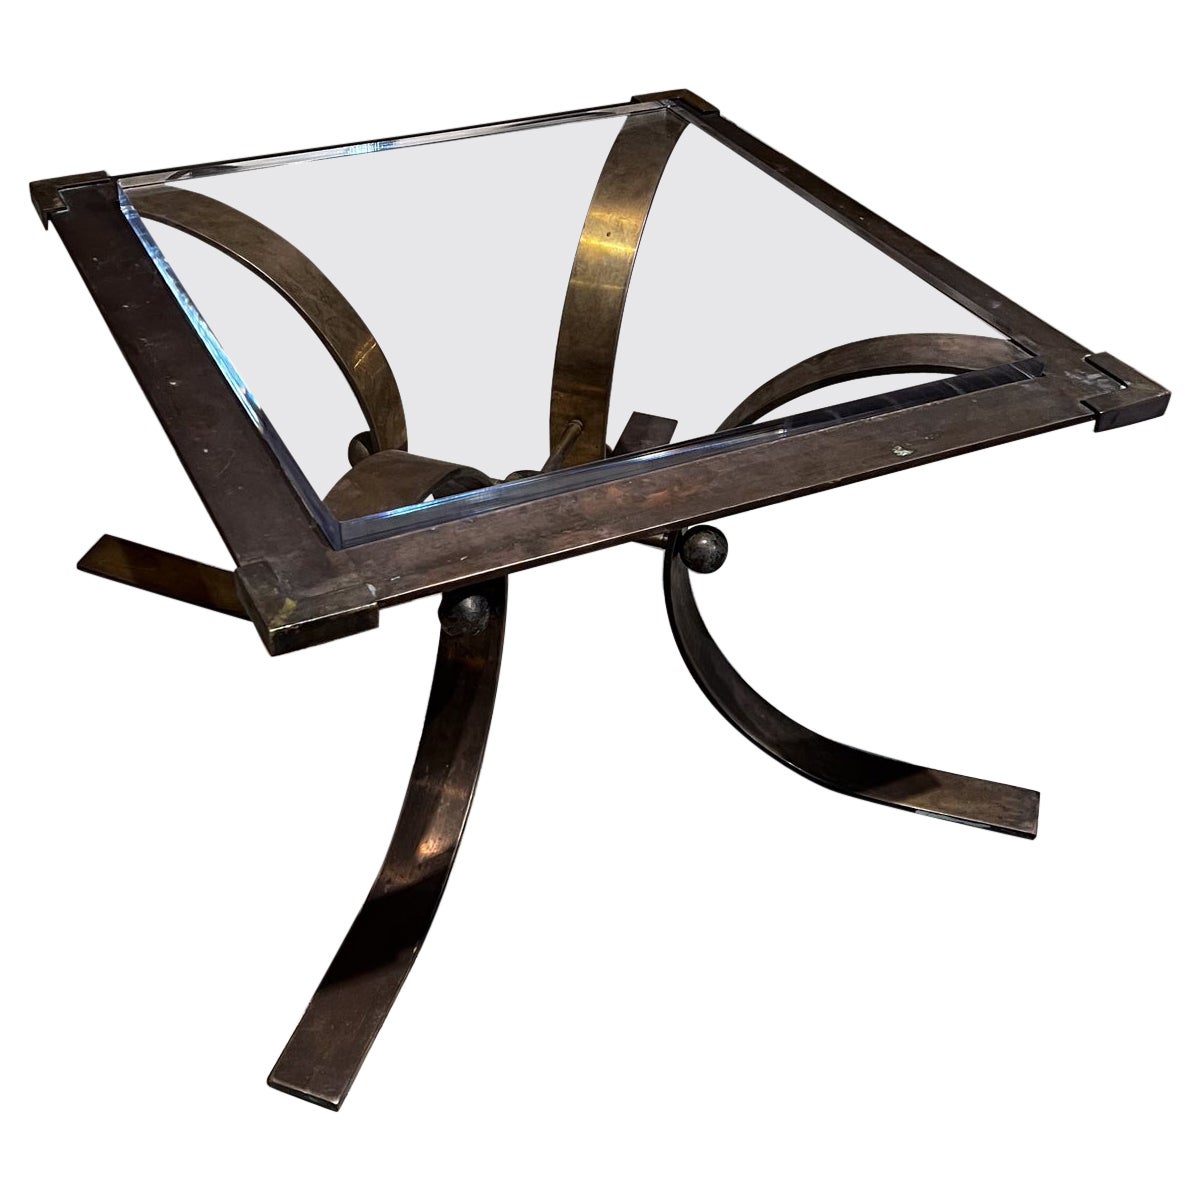 1950s Arturo Pani Sculptural Side Table in Patinated Brass Mexico City